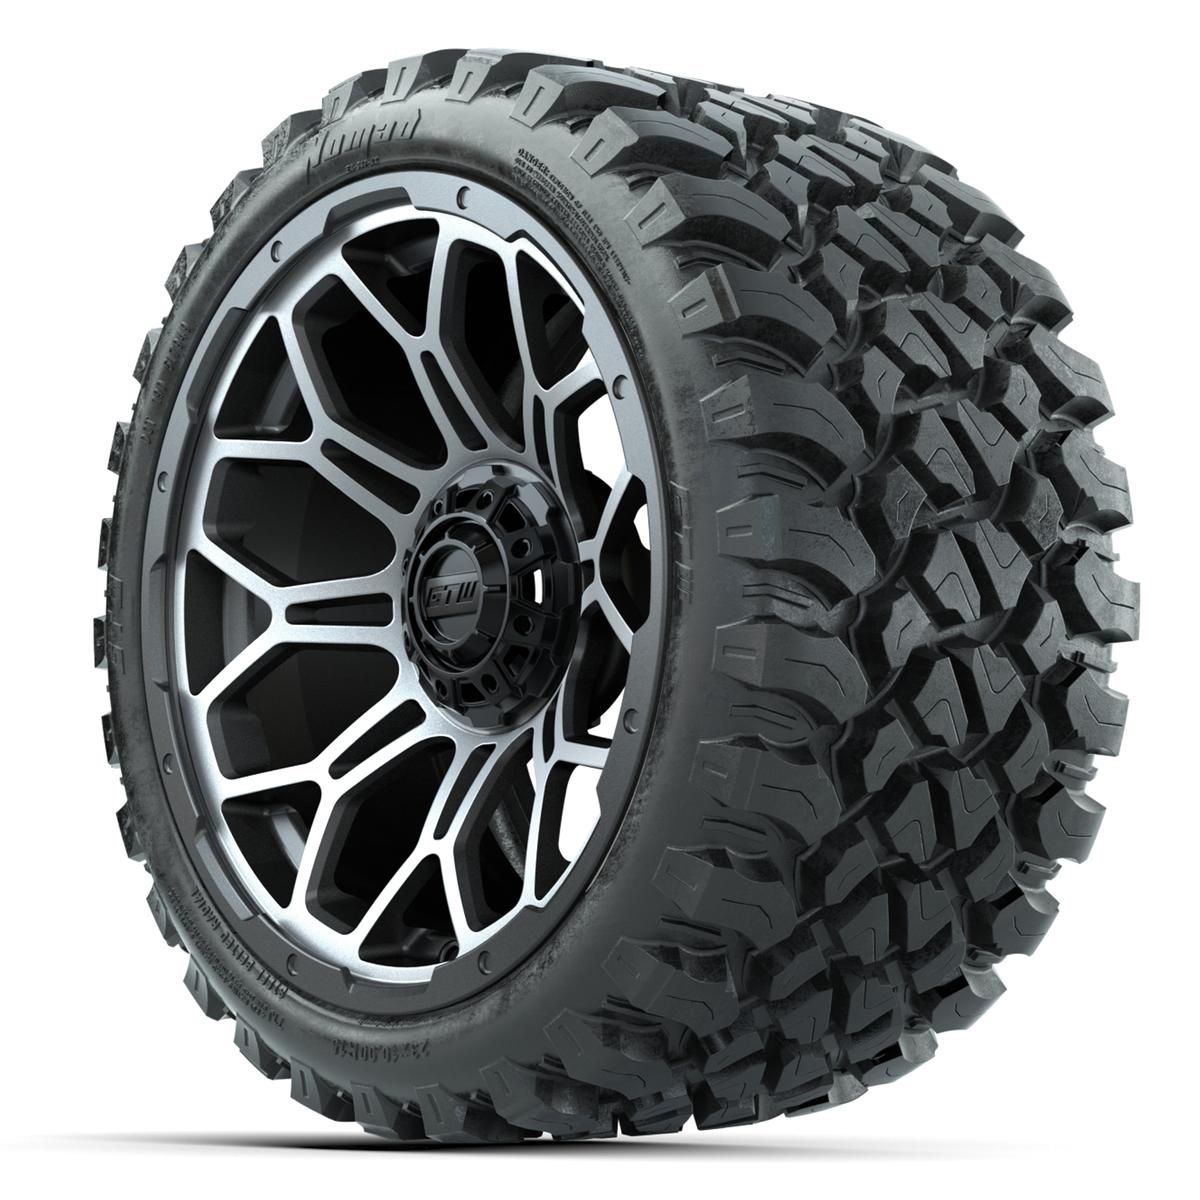 Set of (4) 15&Prime; GTW Bravo Matte Gray Wheels with 23x10-R15 Nomad All-Terrain Tires